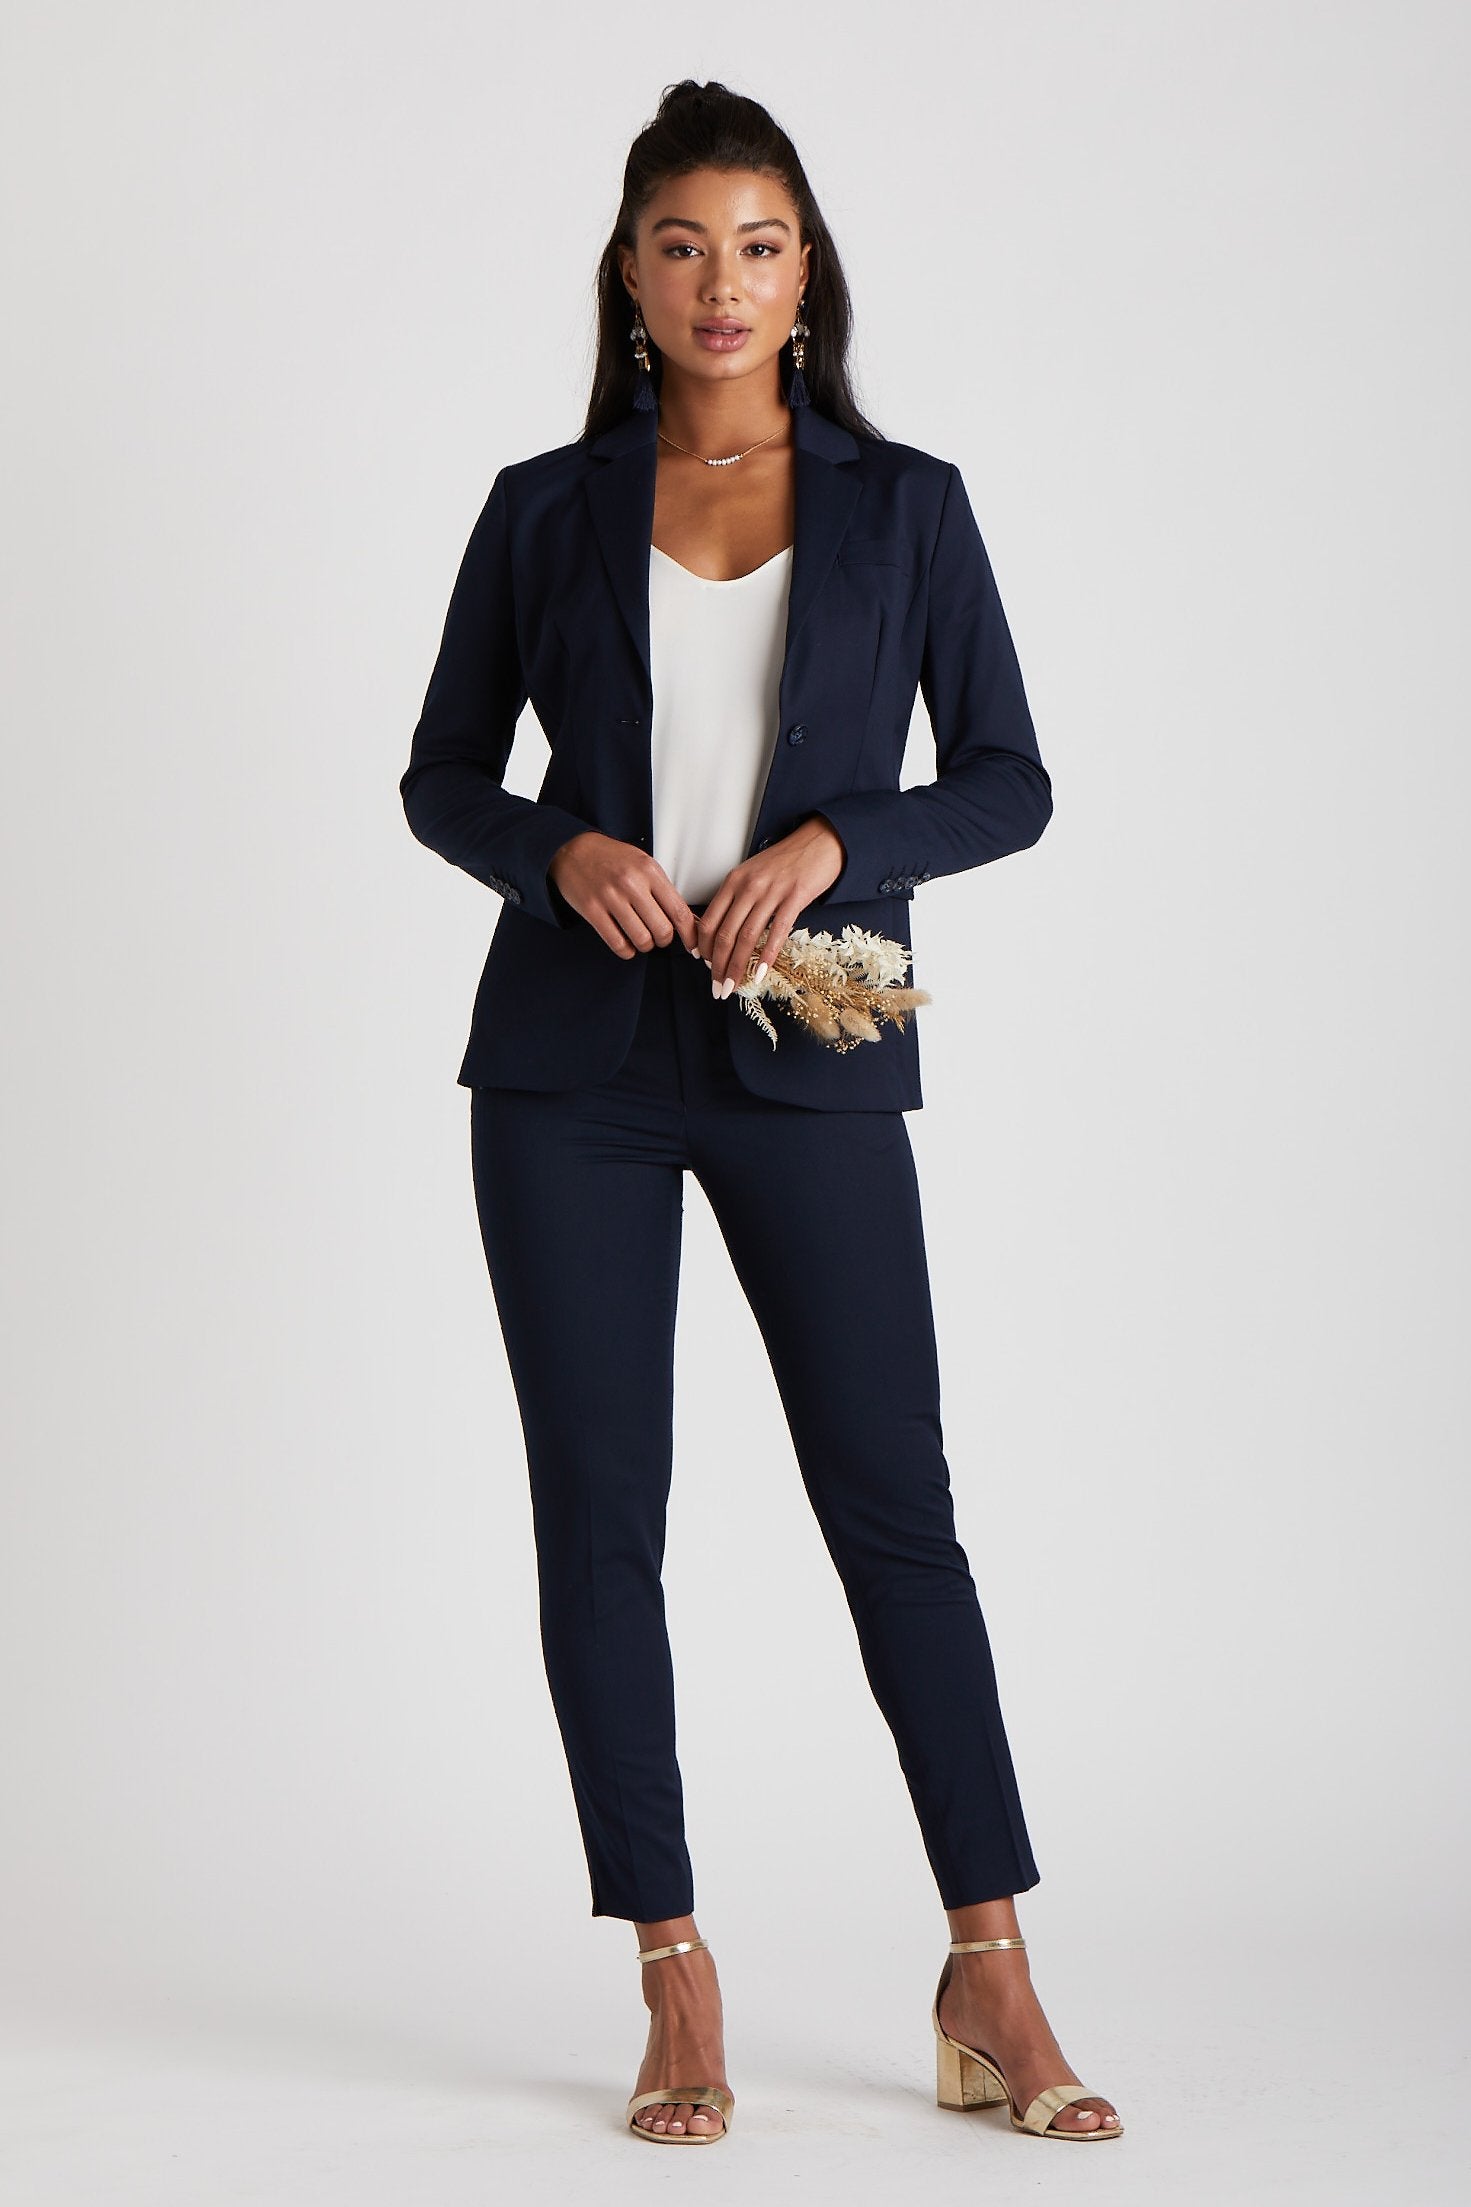 navy blue dress pants for woman